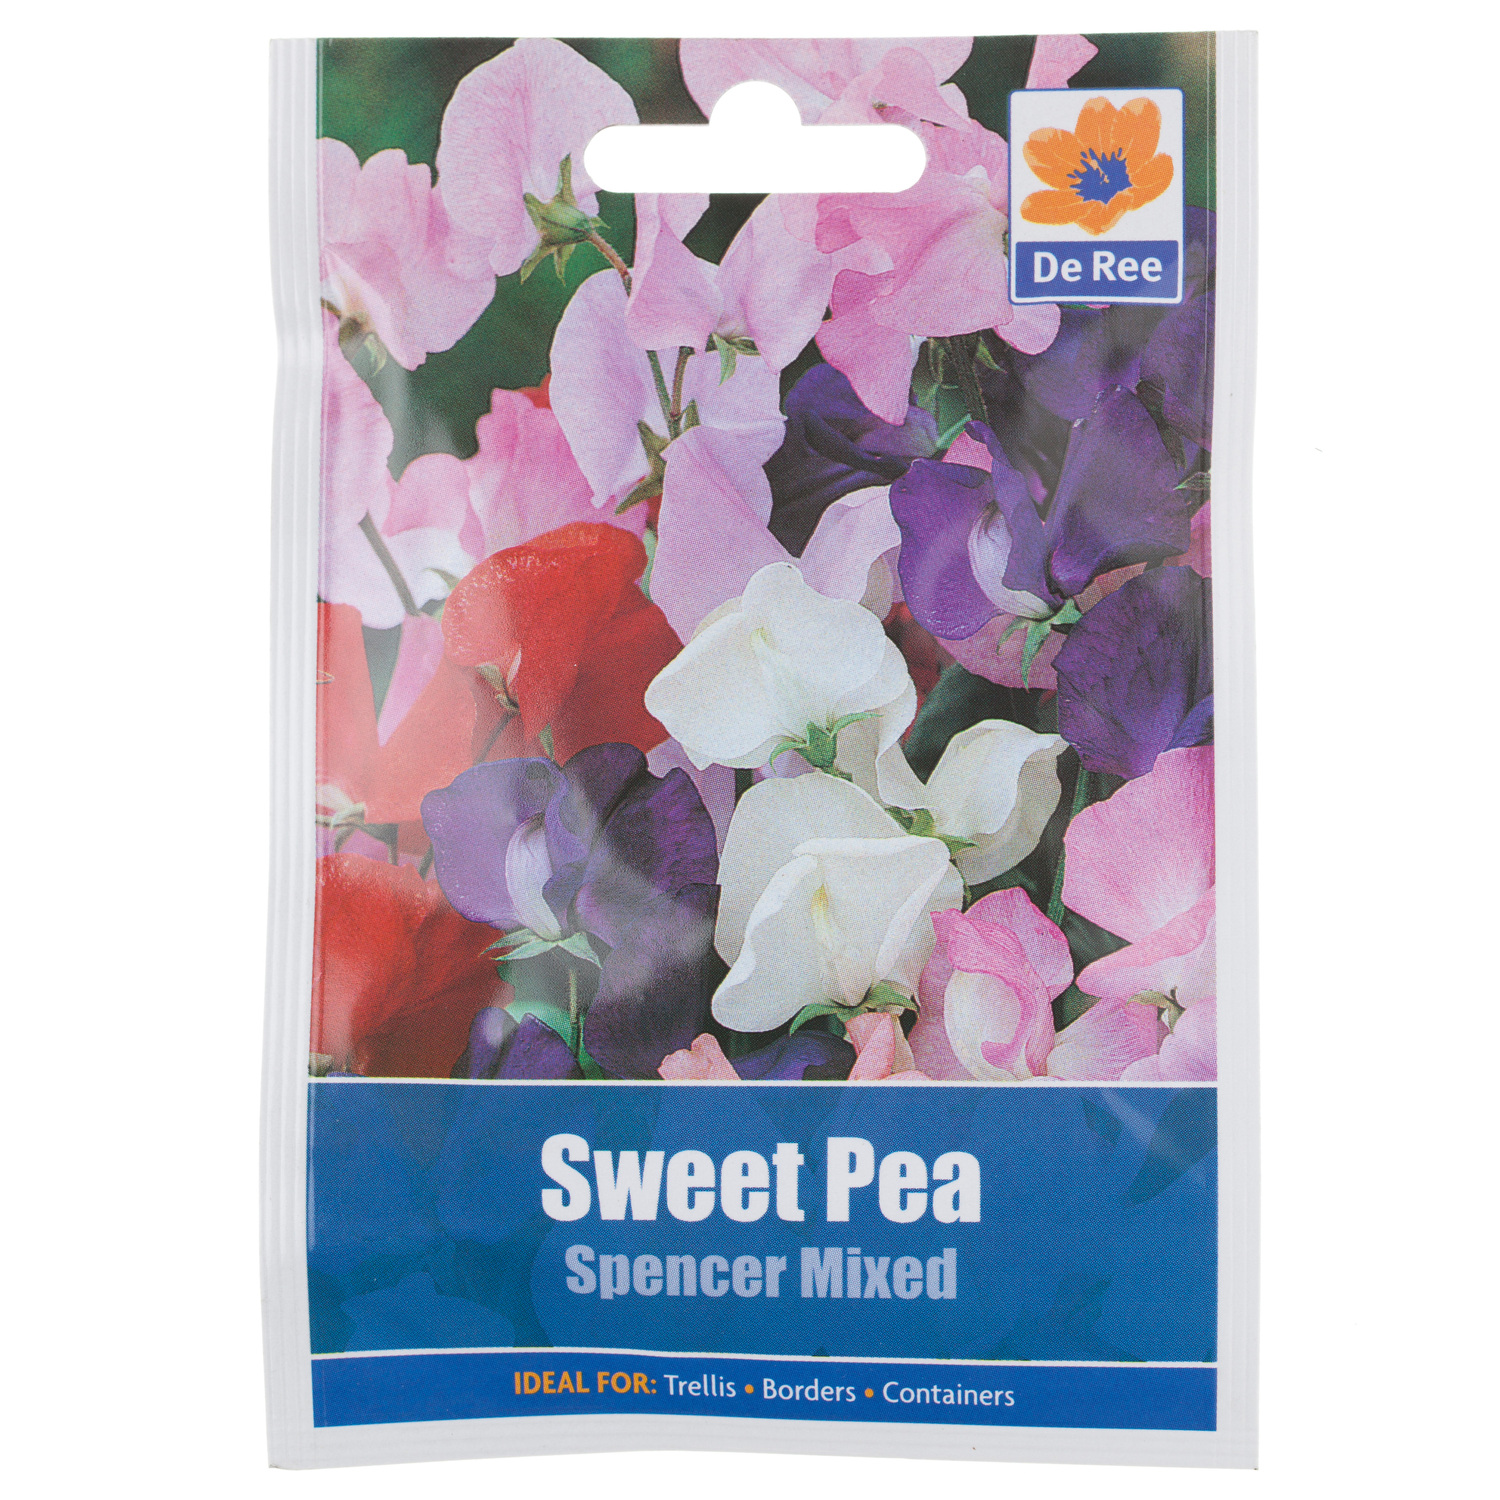 Sweet Pea Spencer Mixed Seed Packet Image